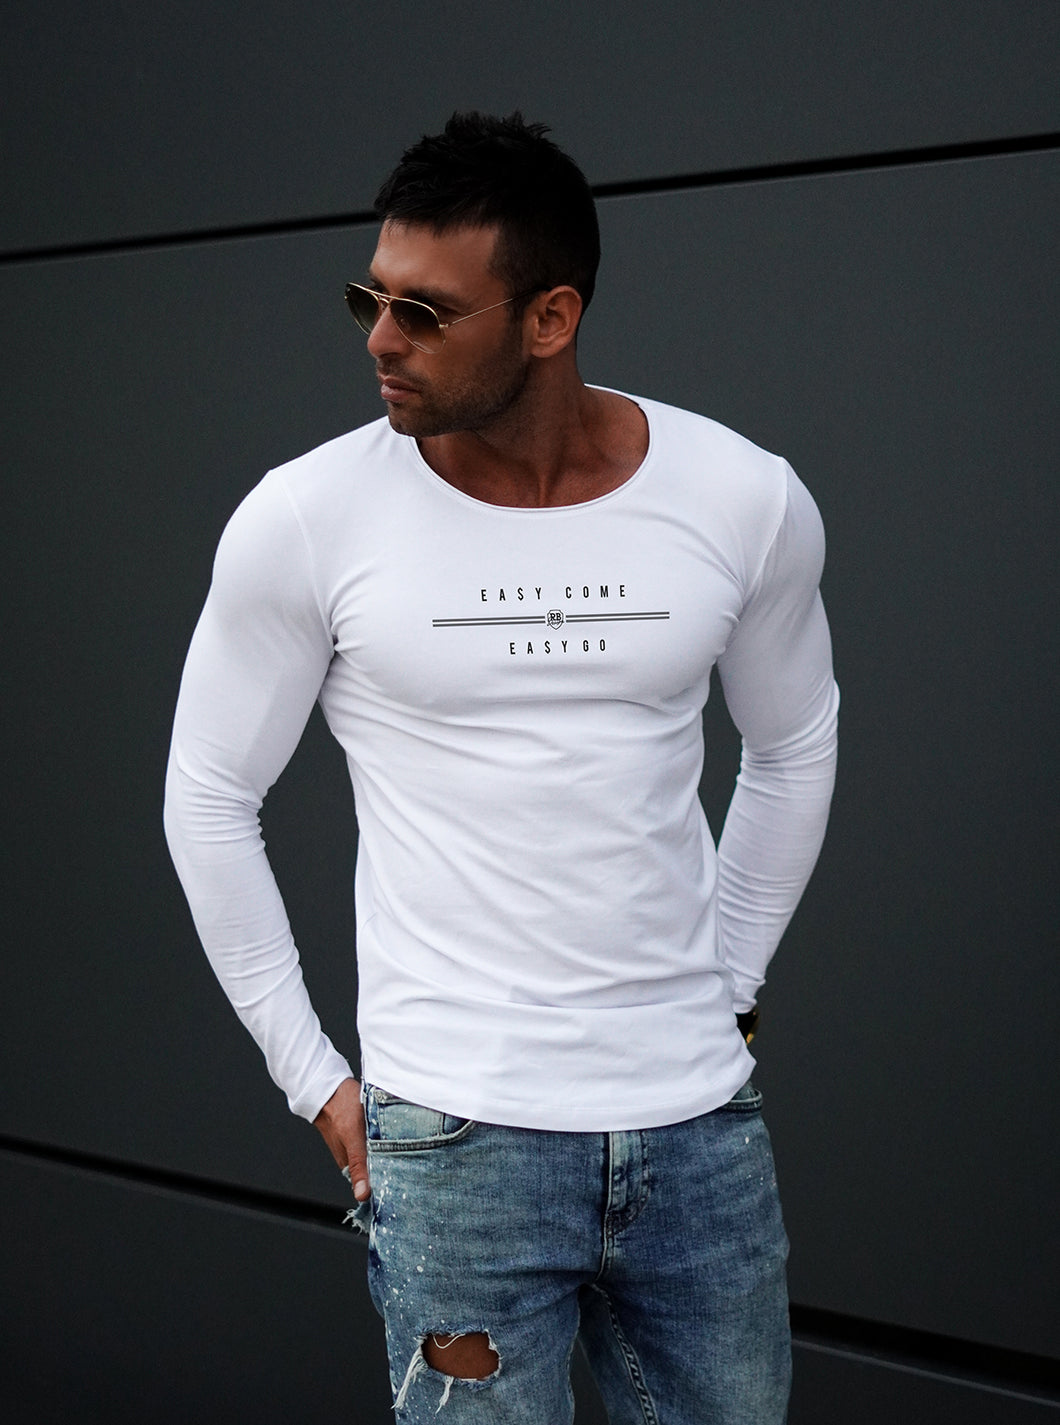 Men's Long Sleeve T-shirts / Fit Clothing Online / Casual Tees – RB Design Store